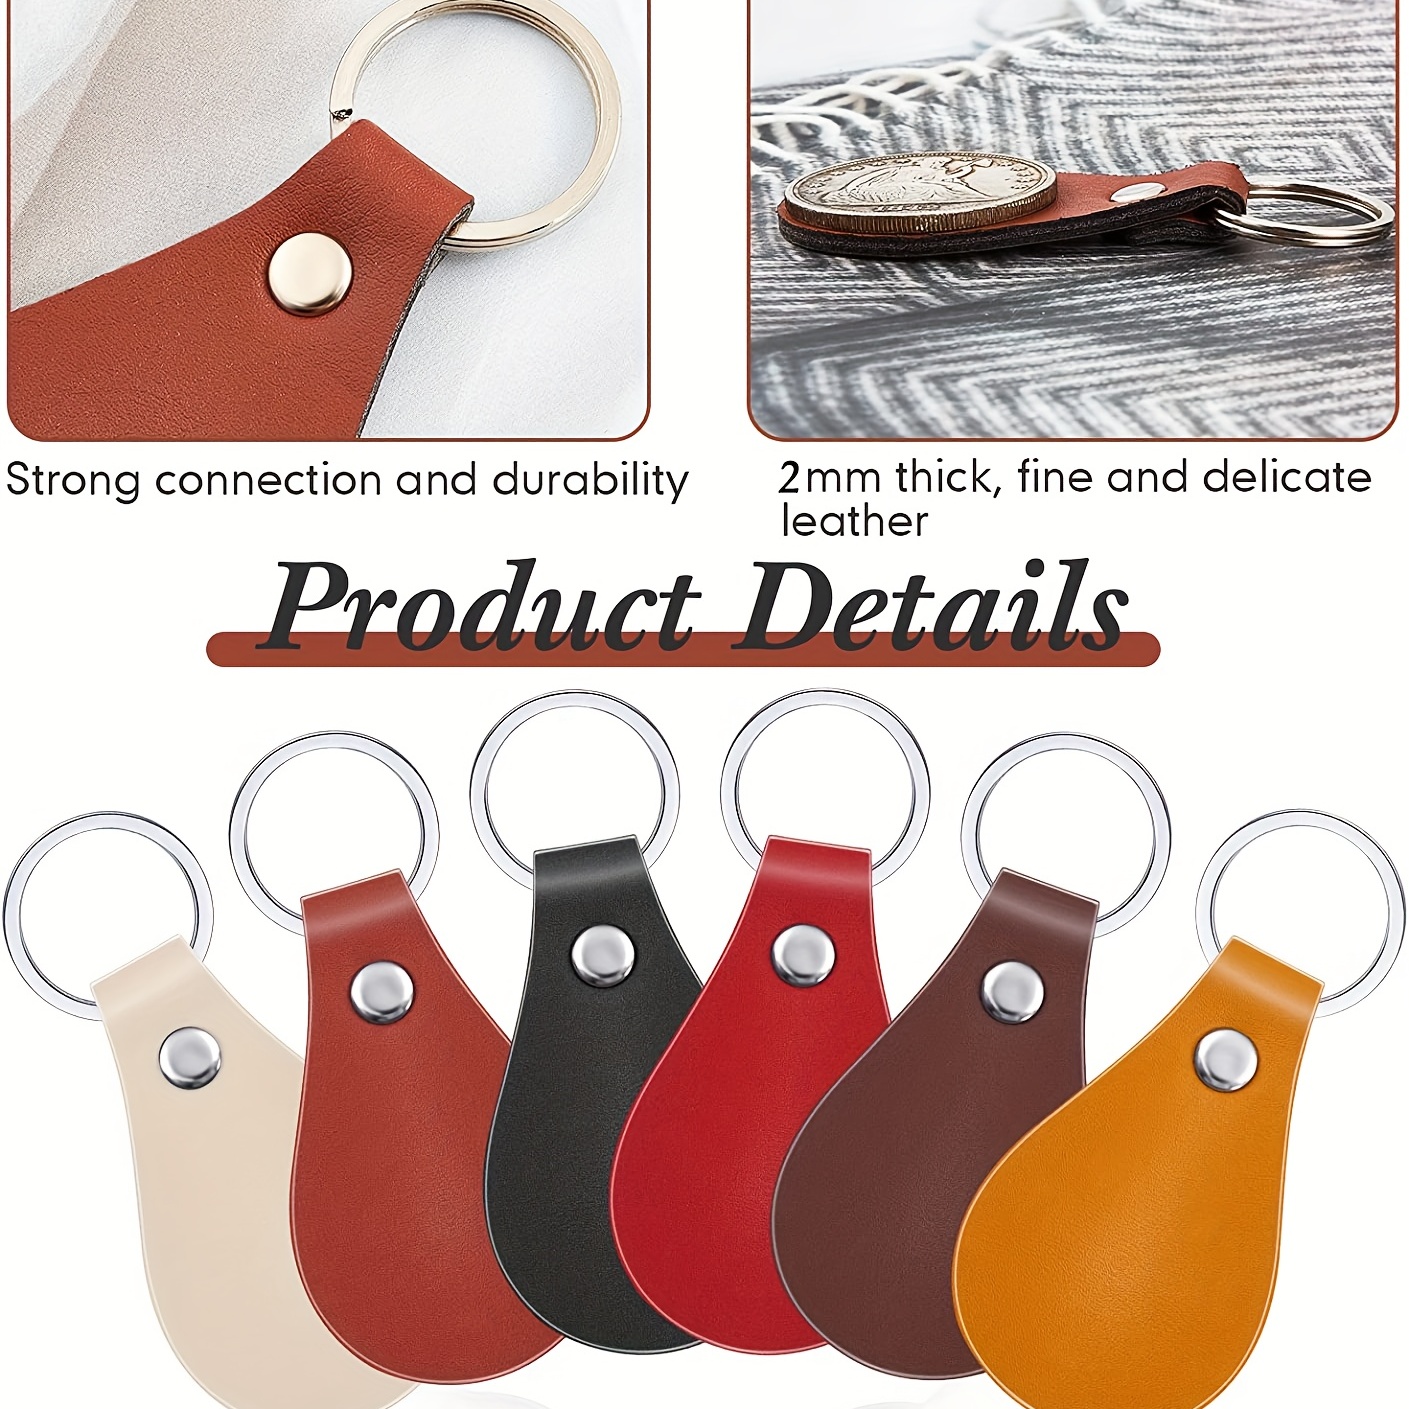 PitkaLeather Leather Keychains Blank 10 Pack Kit, Russet Leather Key Fobs, Laser Engraving-Foil Stamping-Promotional, Business, Marketing, Events Gifts